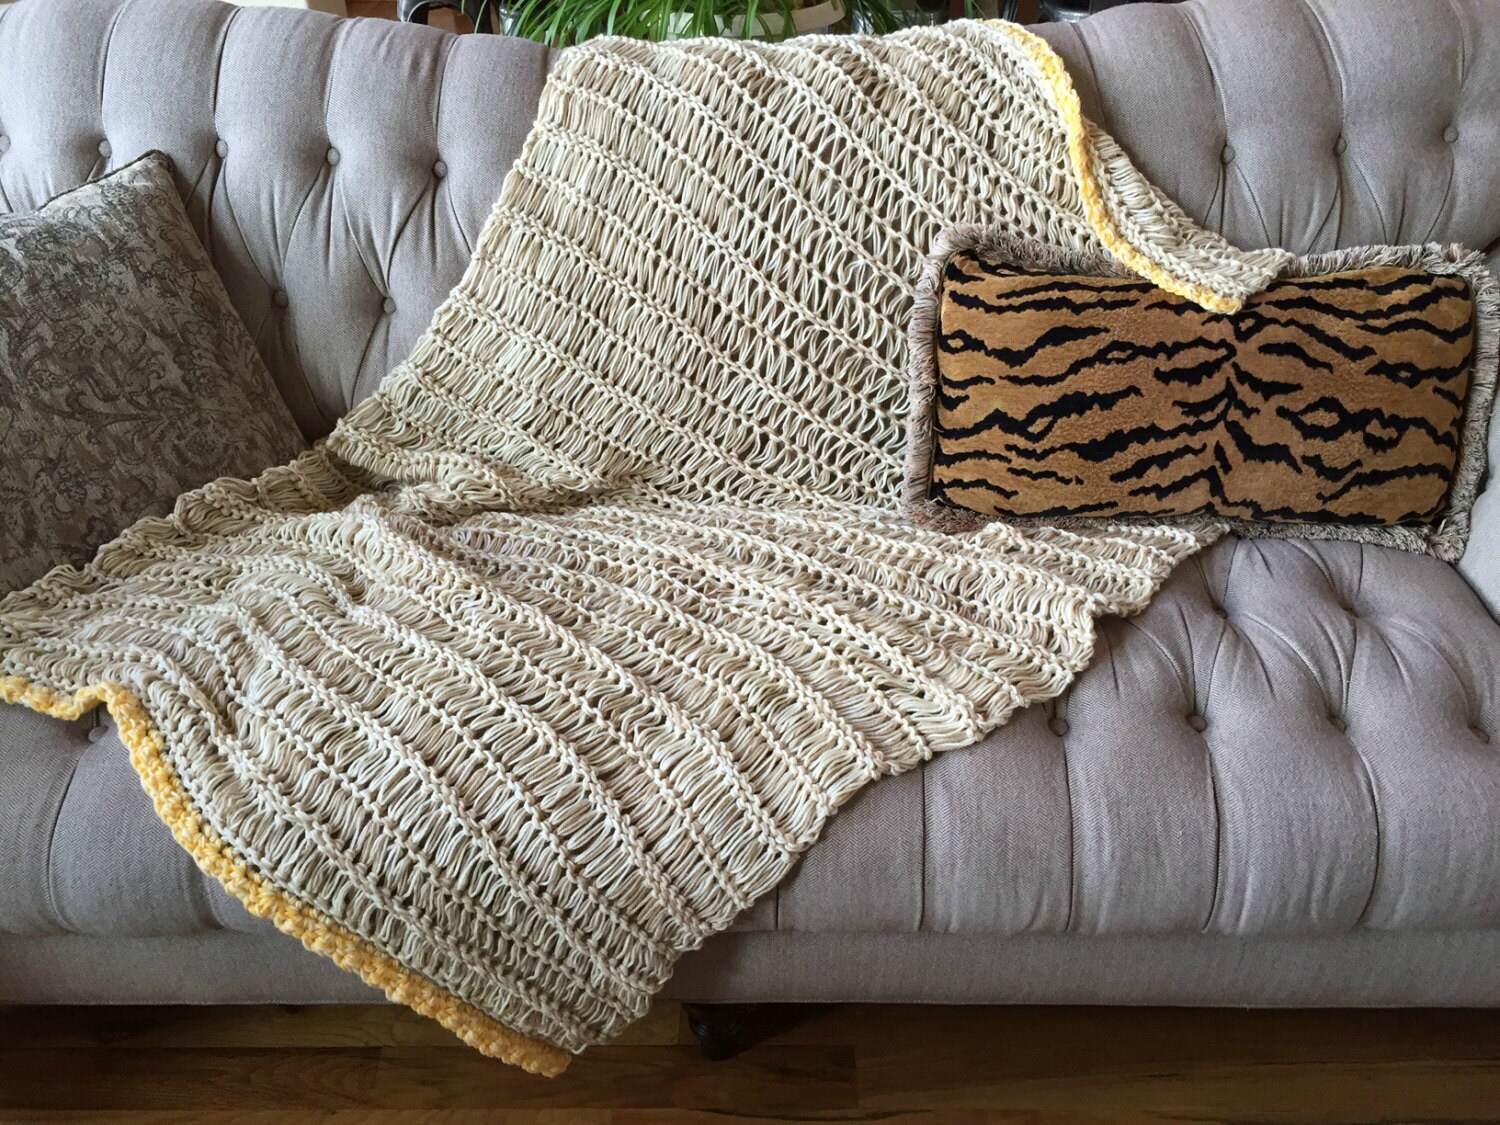 Rustic Modern Home Decor Knit and Crochet Blanket Throw Afghan | Etsy